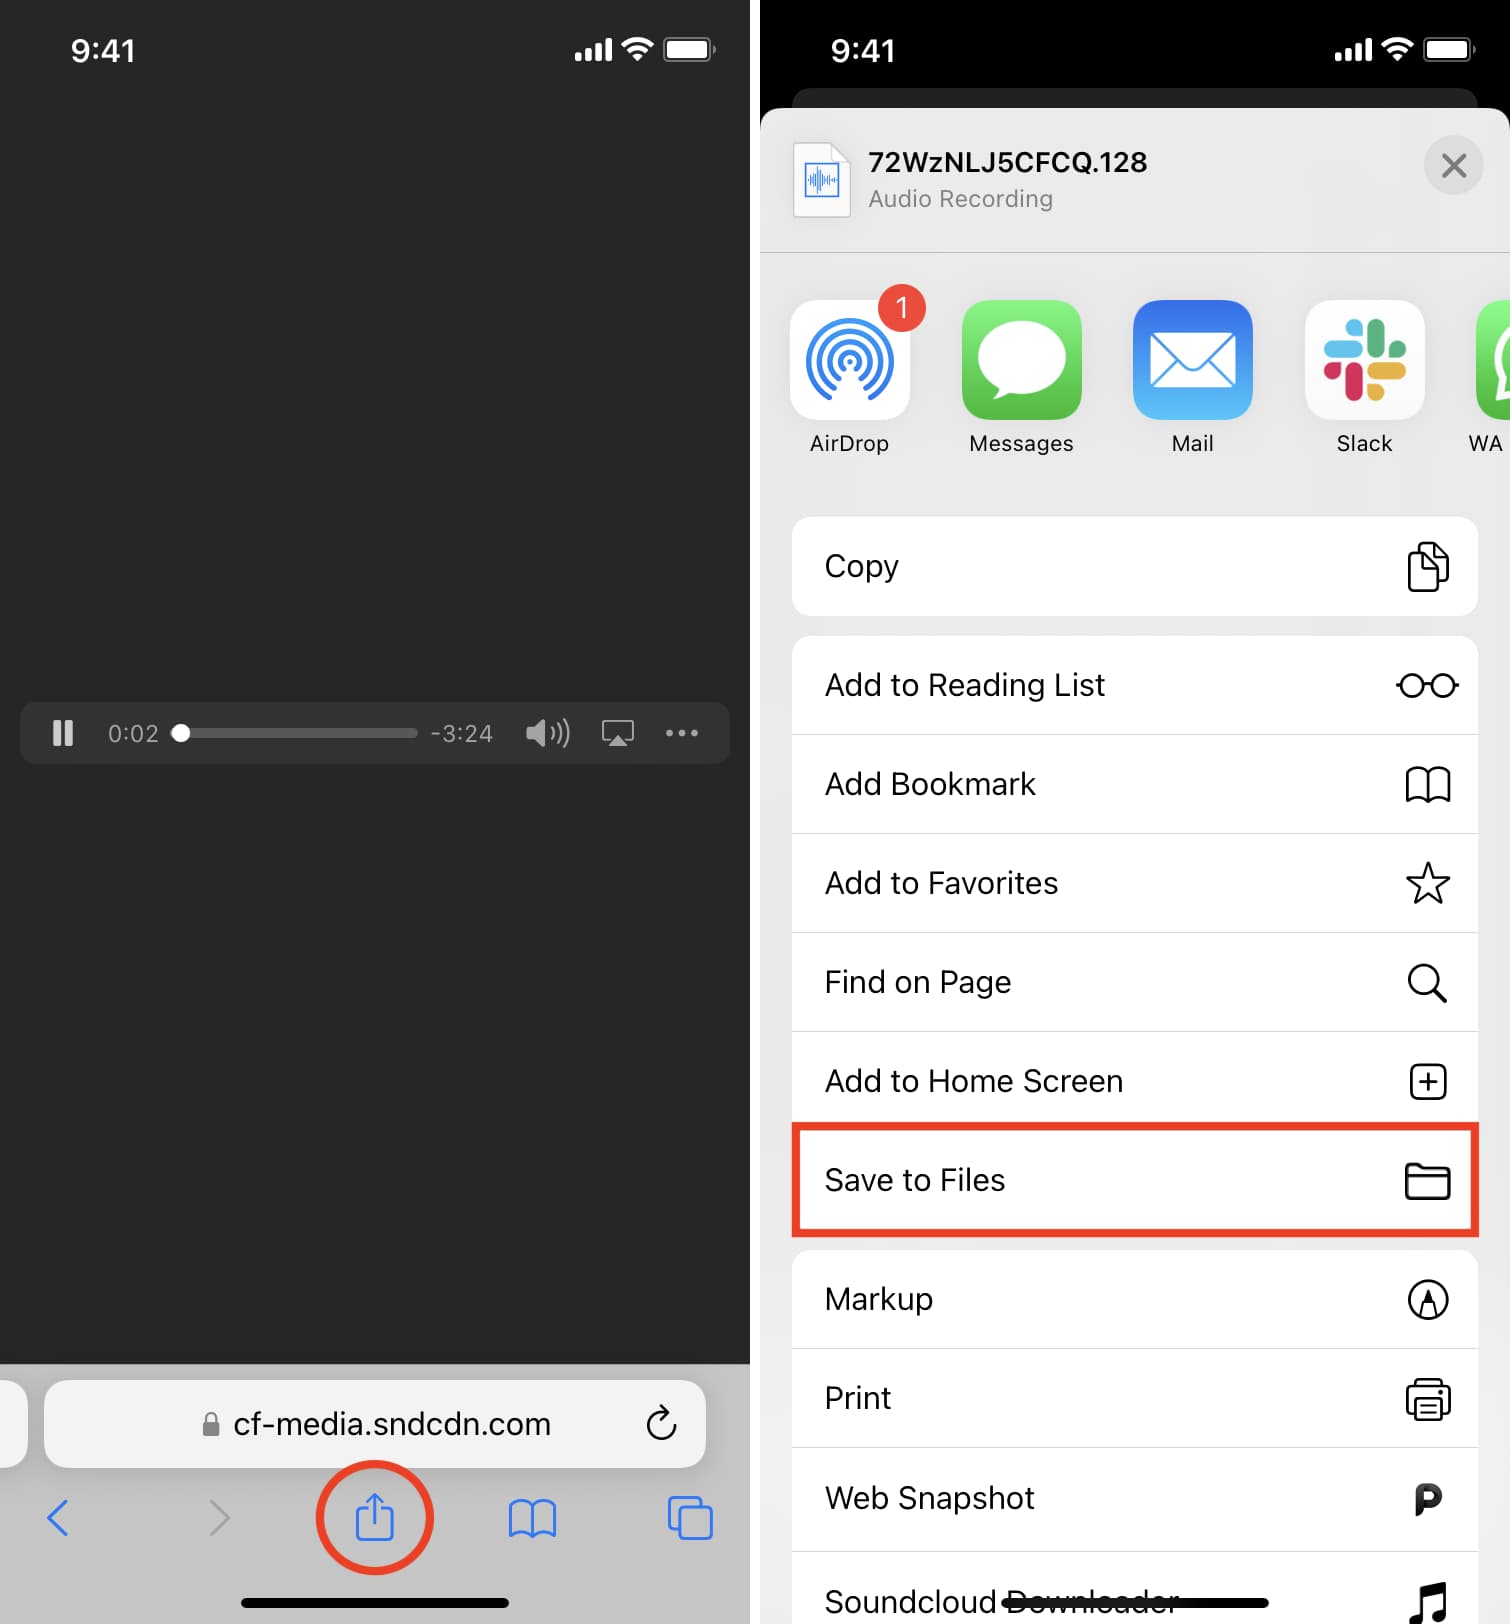 Save SoundCloud song to iPhone in the Files app